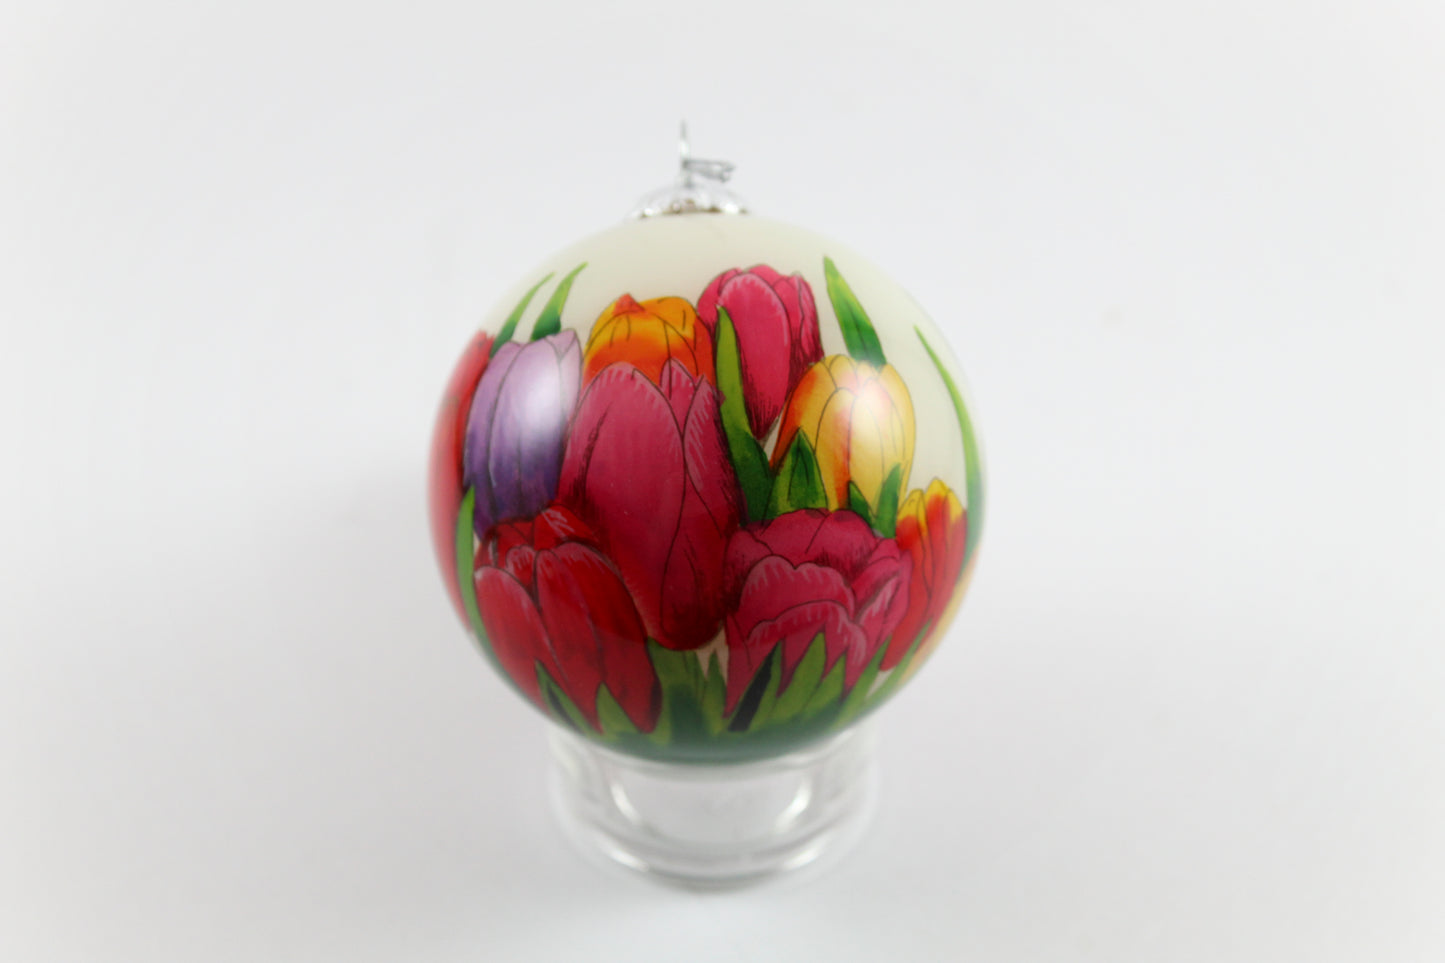 Amsterdam Tulip Museum Perfect Tulip Patch Hand-Painted Glass Tree Ornament